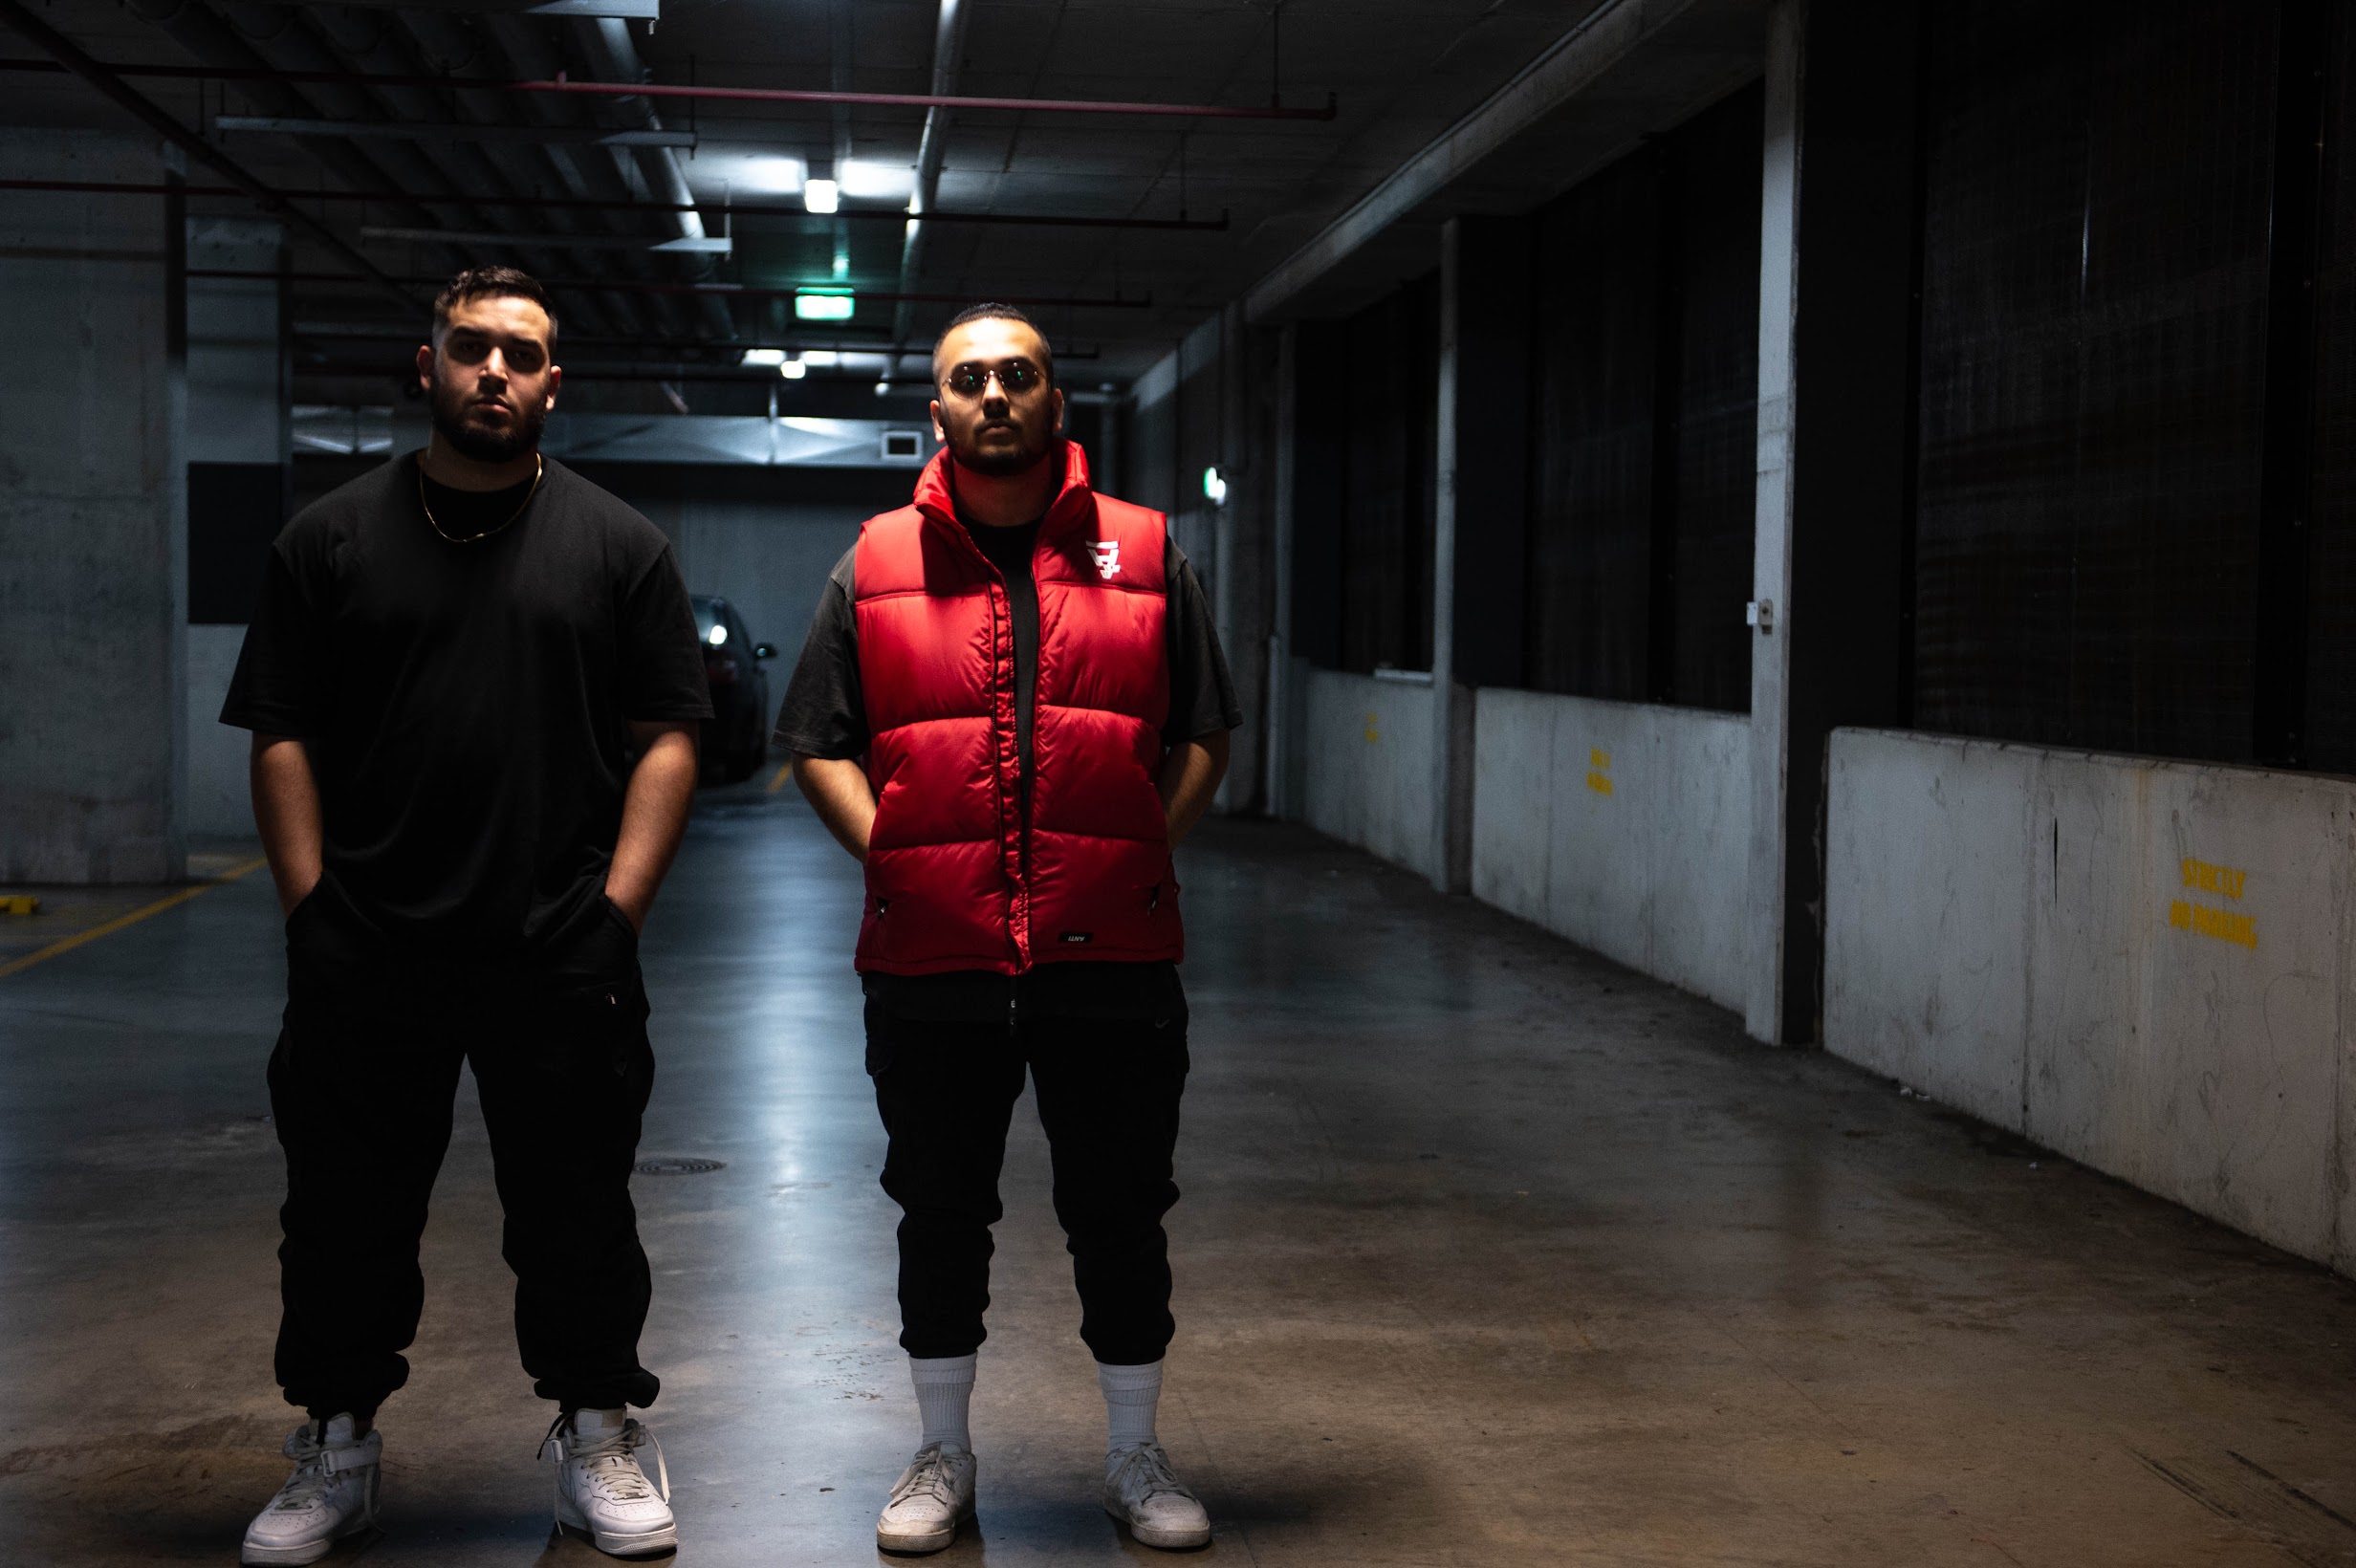 ACCLAIMED PRODUCERS & ARTISTS SHEPH.ART & BARRY SALEH COMBINE FOR LUSH HIP-HOP TRACK ‘ACTION’